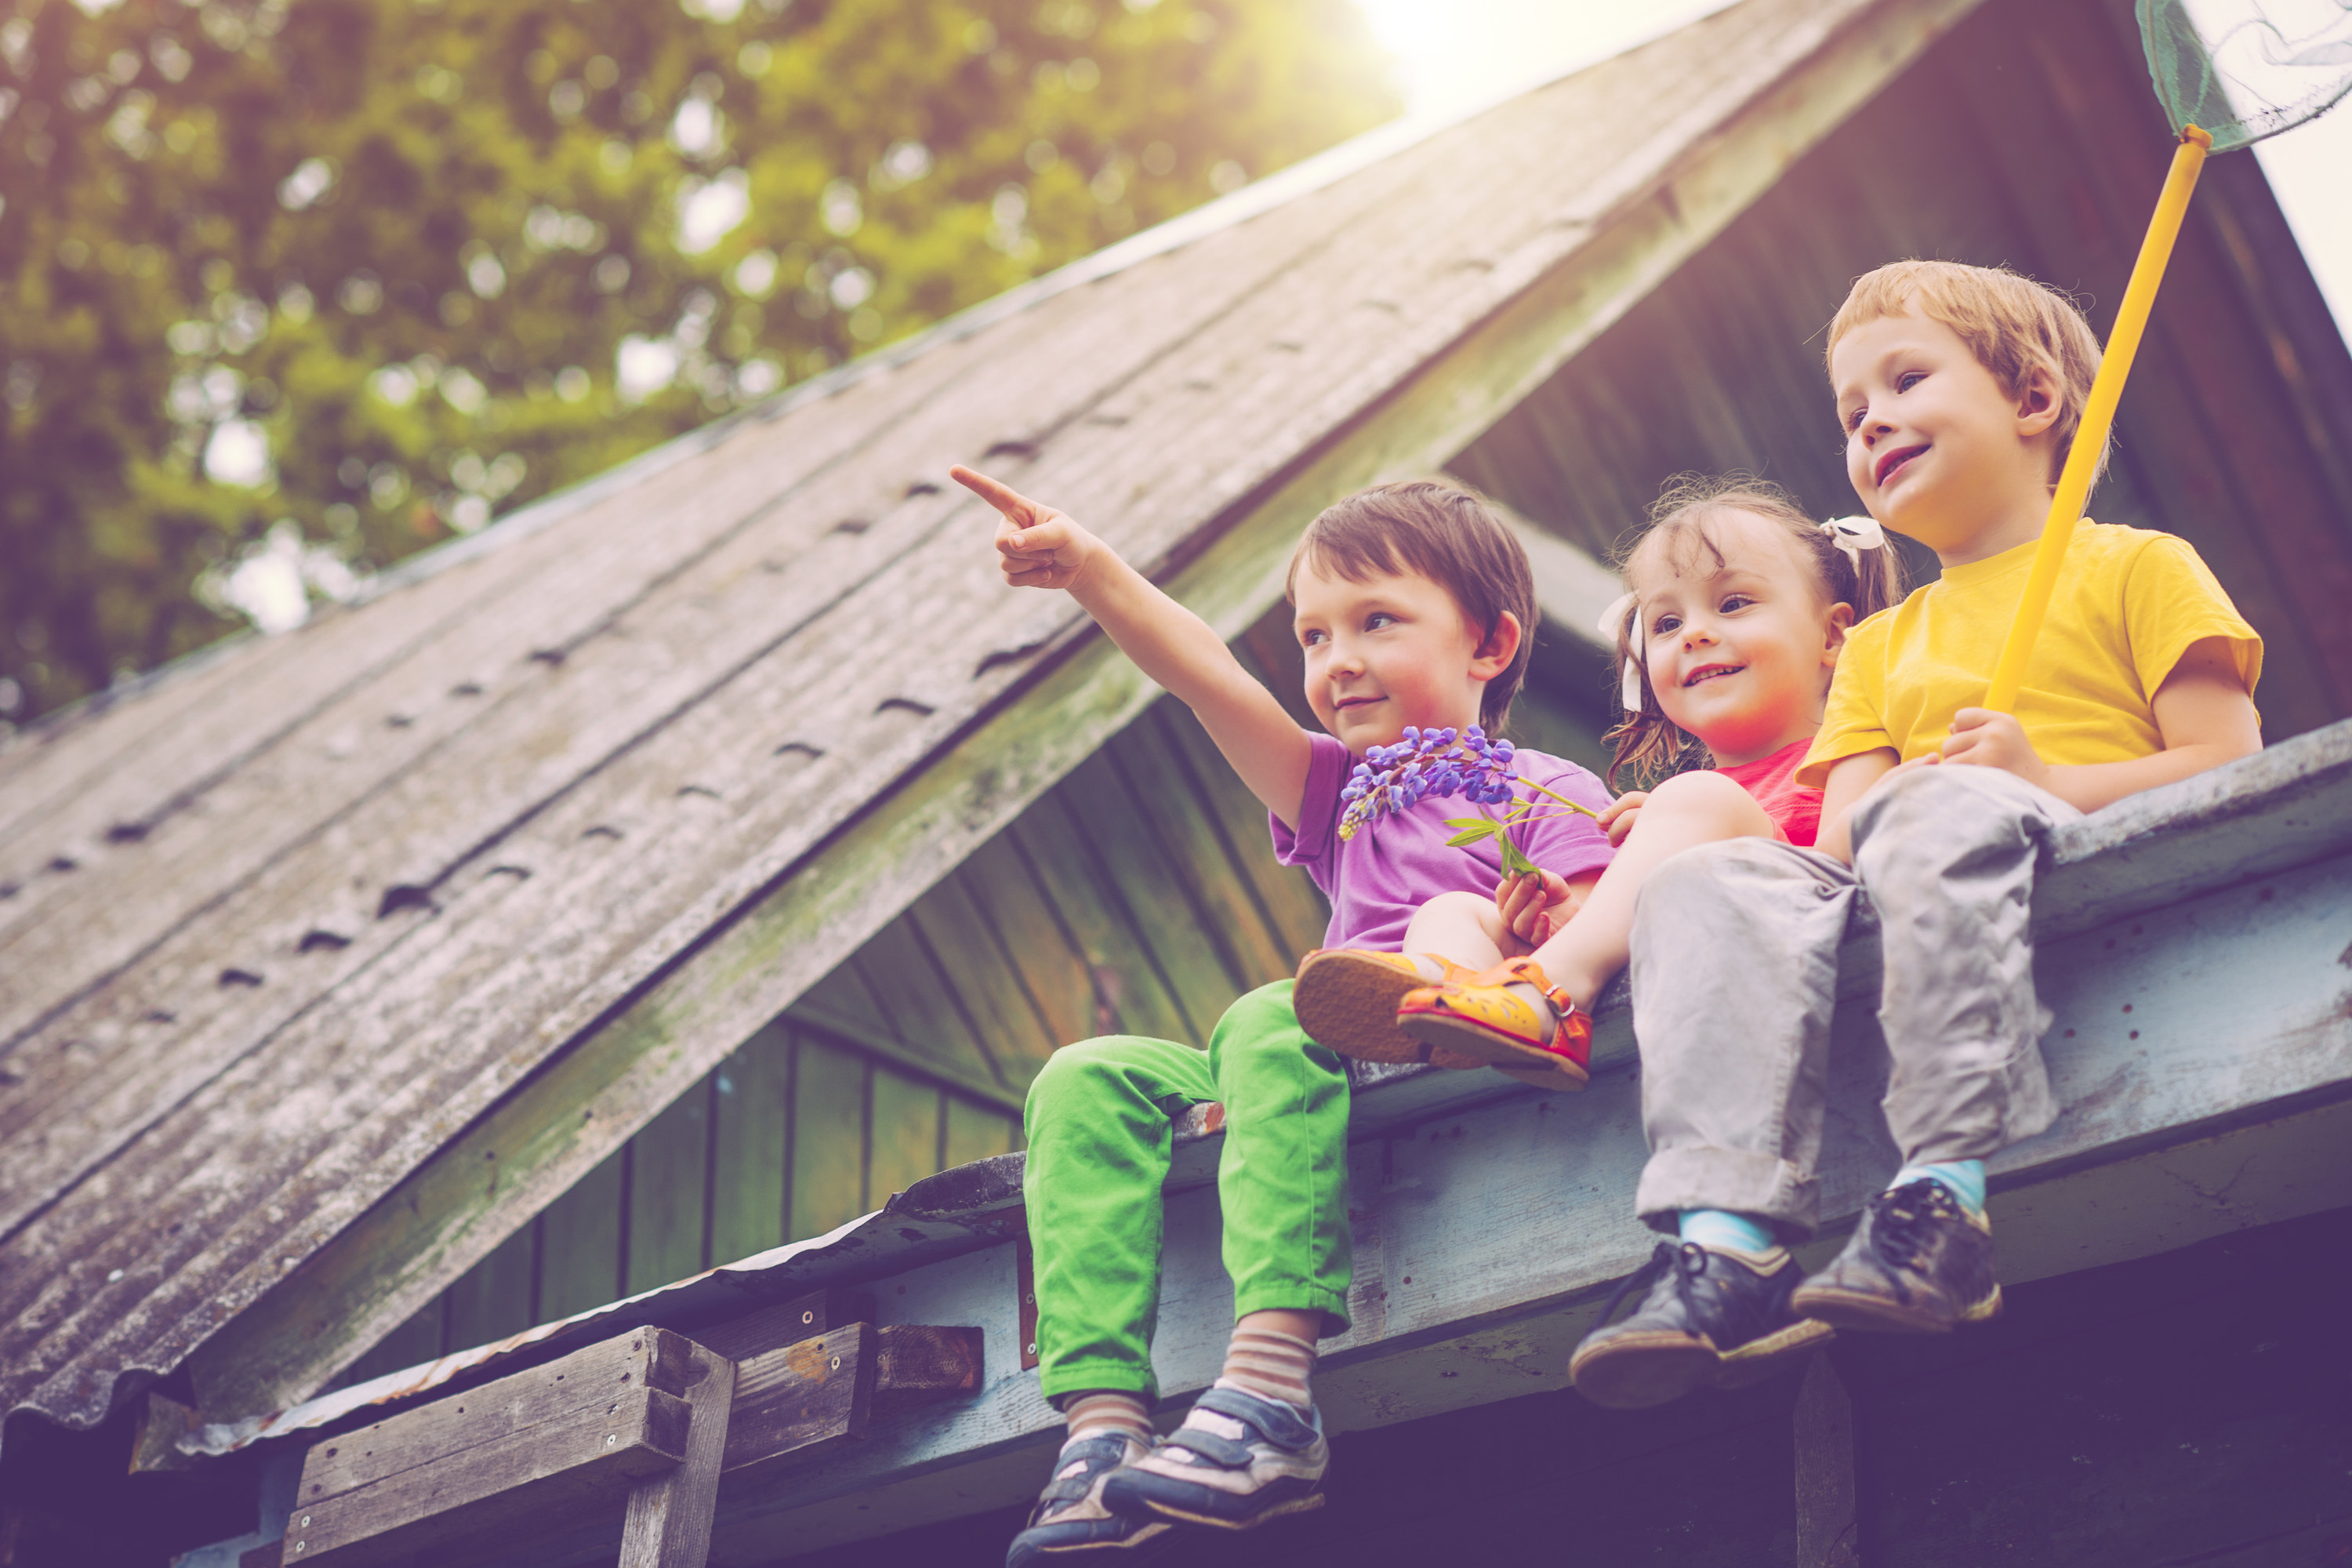 kids sitting on a roof together with their legs dangling over the side